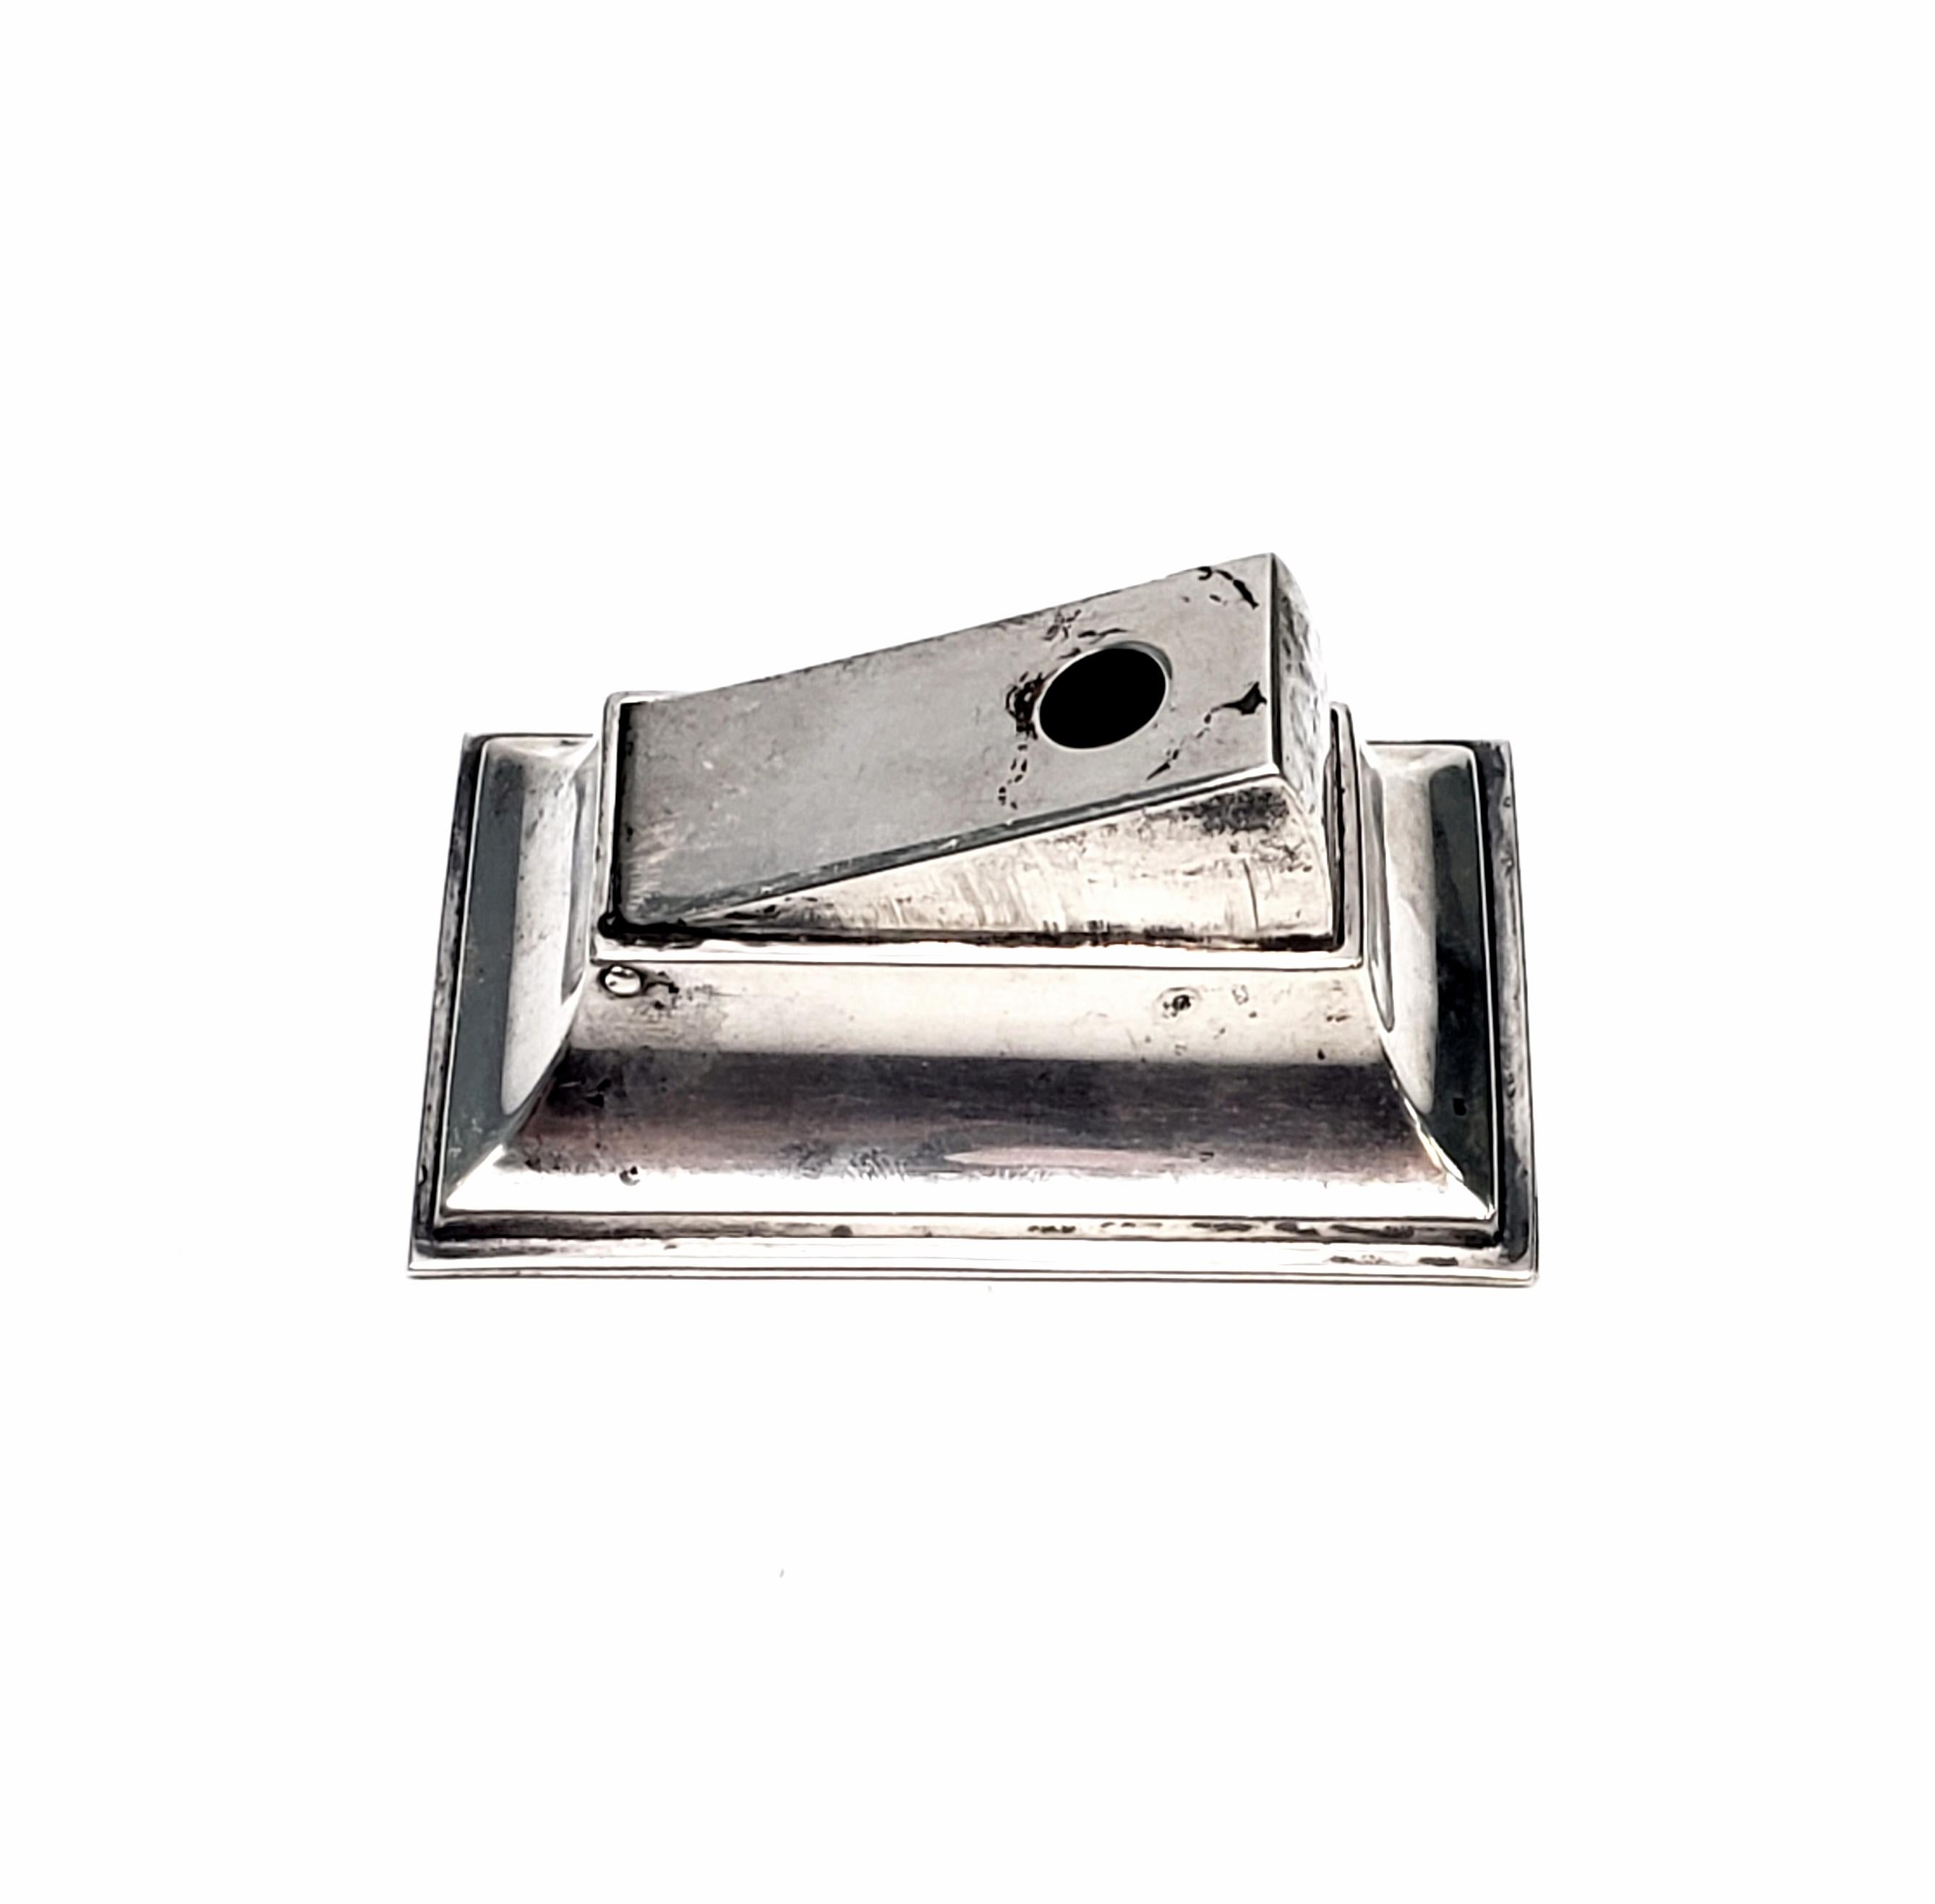 Vintage sterling silver cigar/cigarette cutter by Merrill Shops of NYC.

The Merrill Shops was a small shop specializing in small items and custom work from 1893-1931. This piece is a small box with a cigar/cigarette cutting mechanism. Bottom